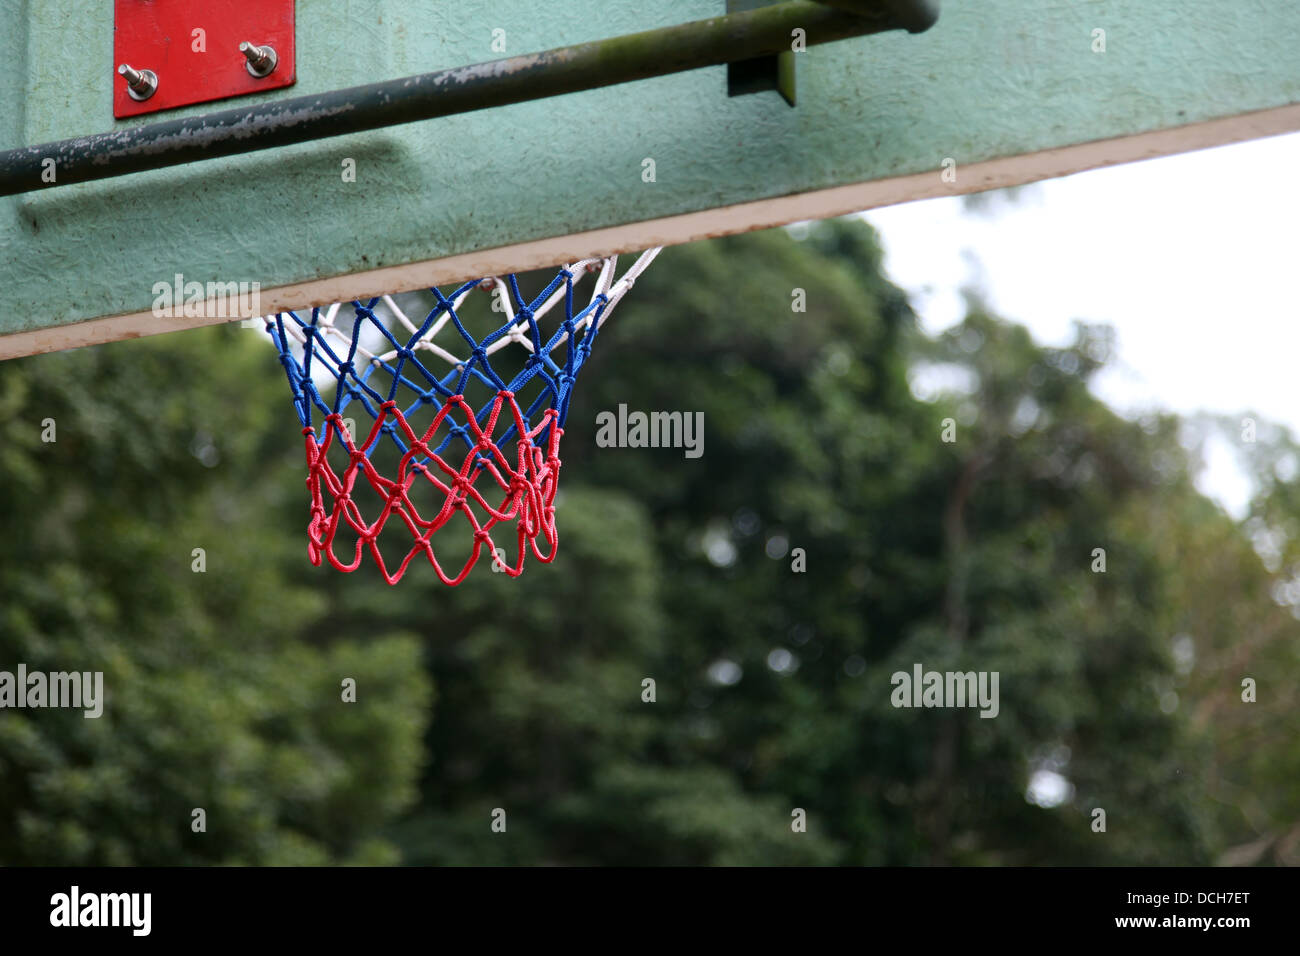 It's a photo of an outdoor basket ball playground with no player. We can see a detail of the basket where players score Stock Photo